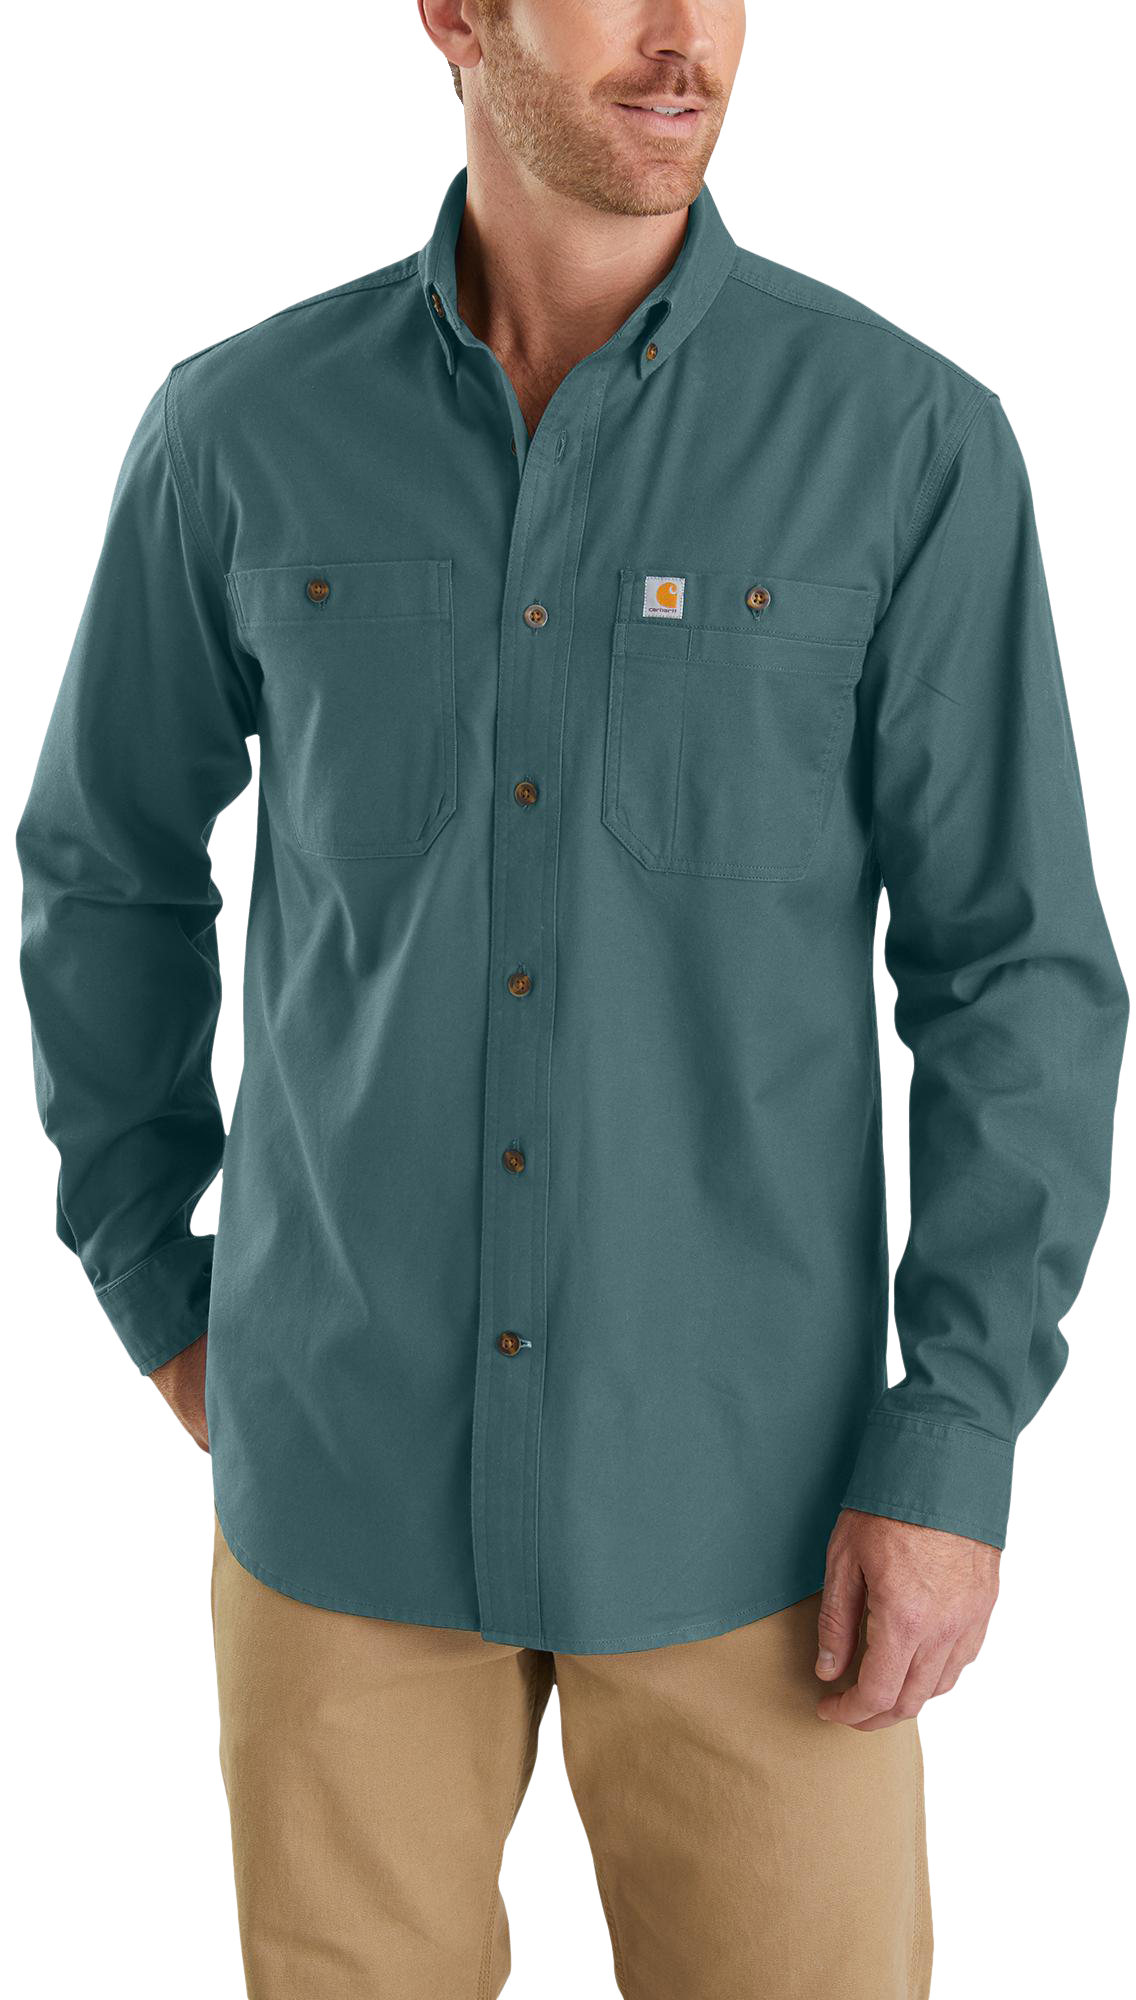 Carhartt Force Fishing-Sporting Button Down Shirt~XL Relaxed Fit